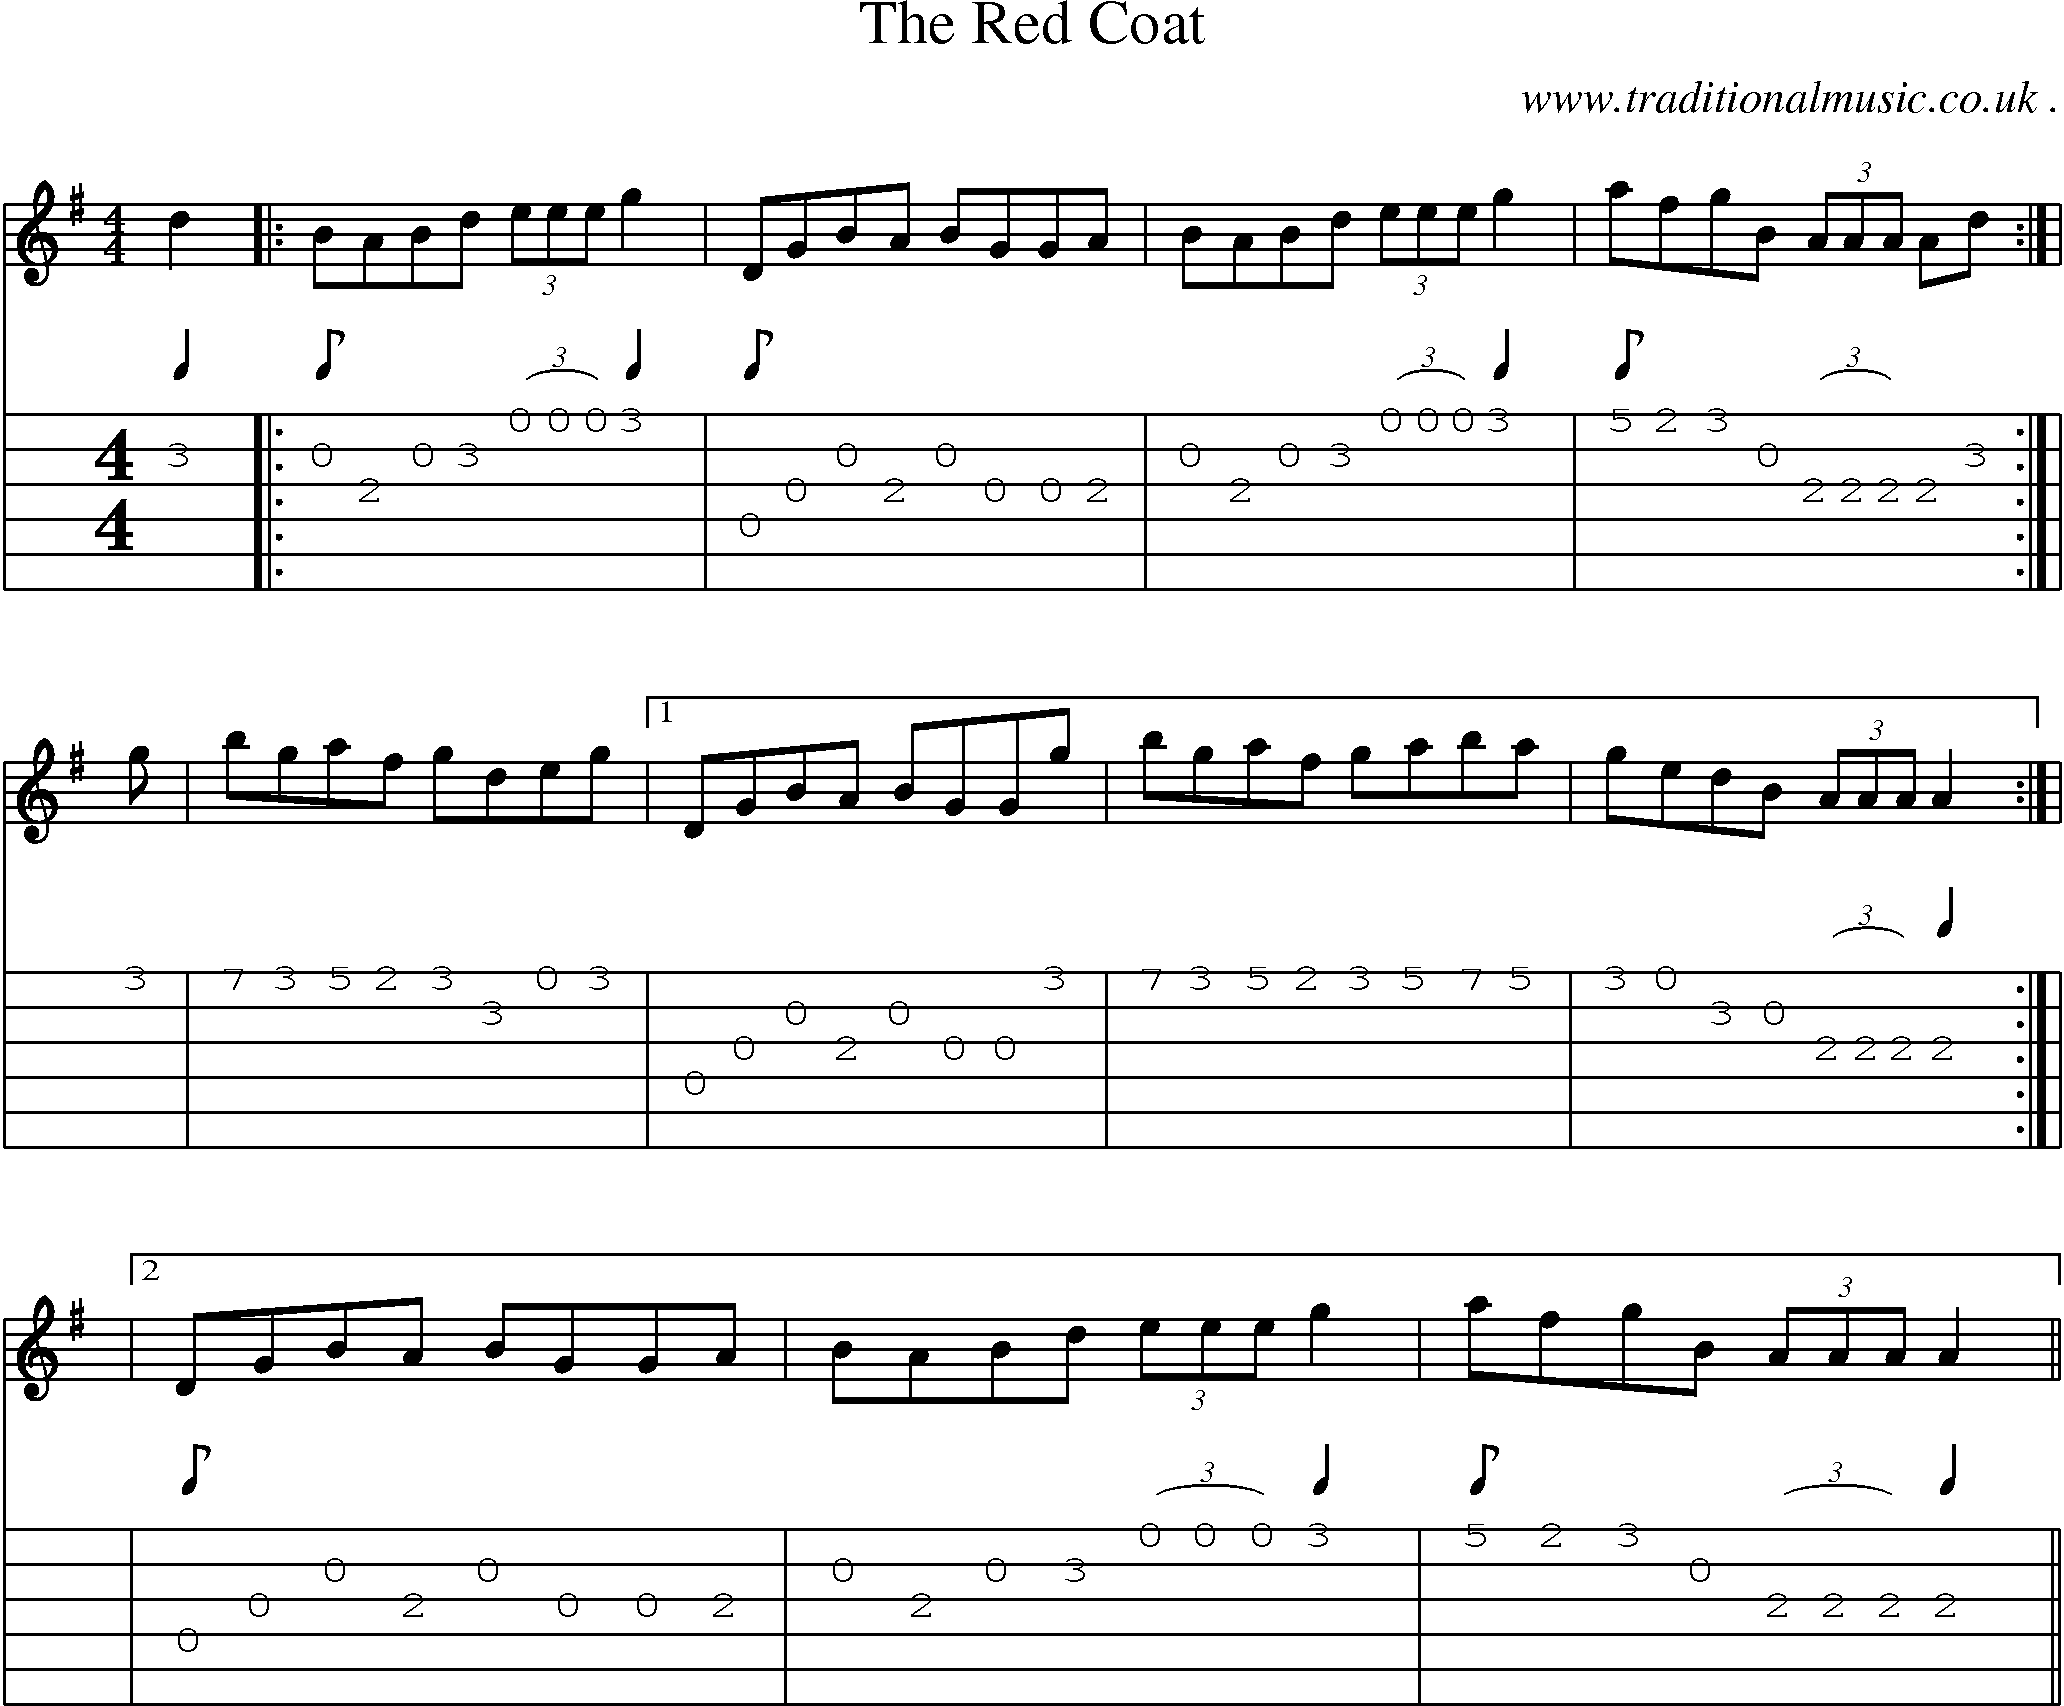 Music Score and Guitar Tabs for The Red Coat